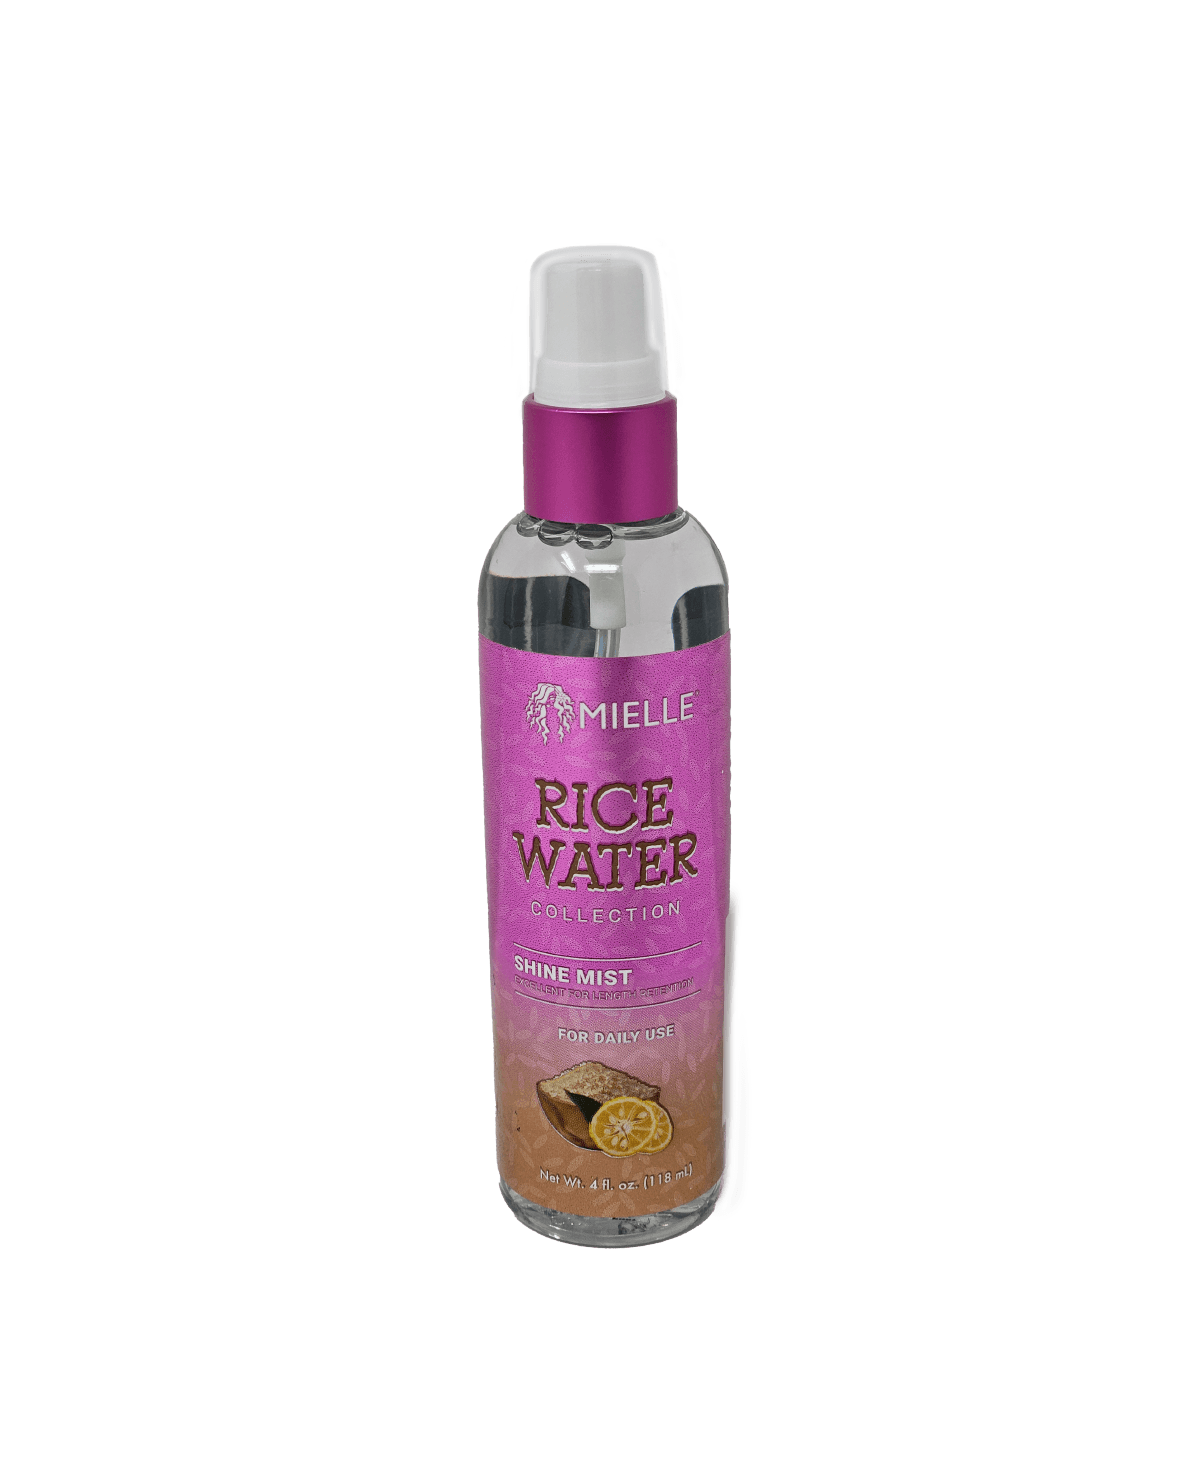 Mielle Rice Water Collection Shine Mist - 4oz